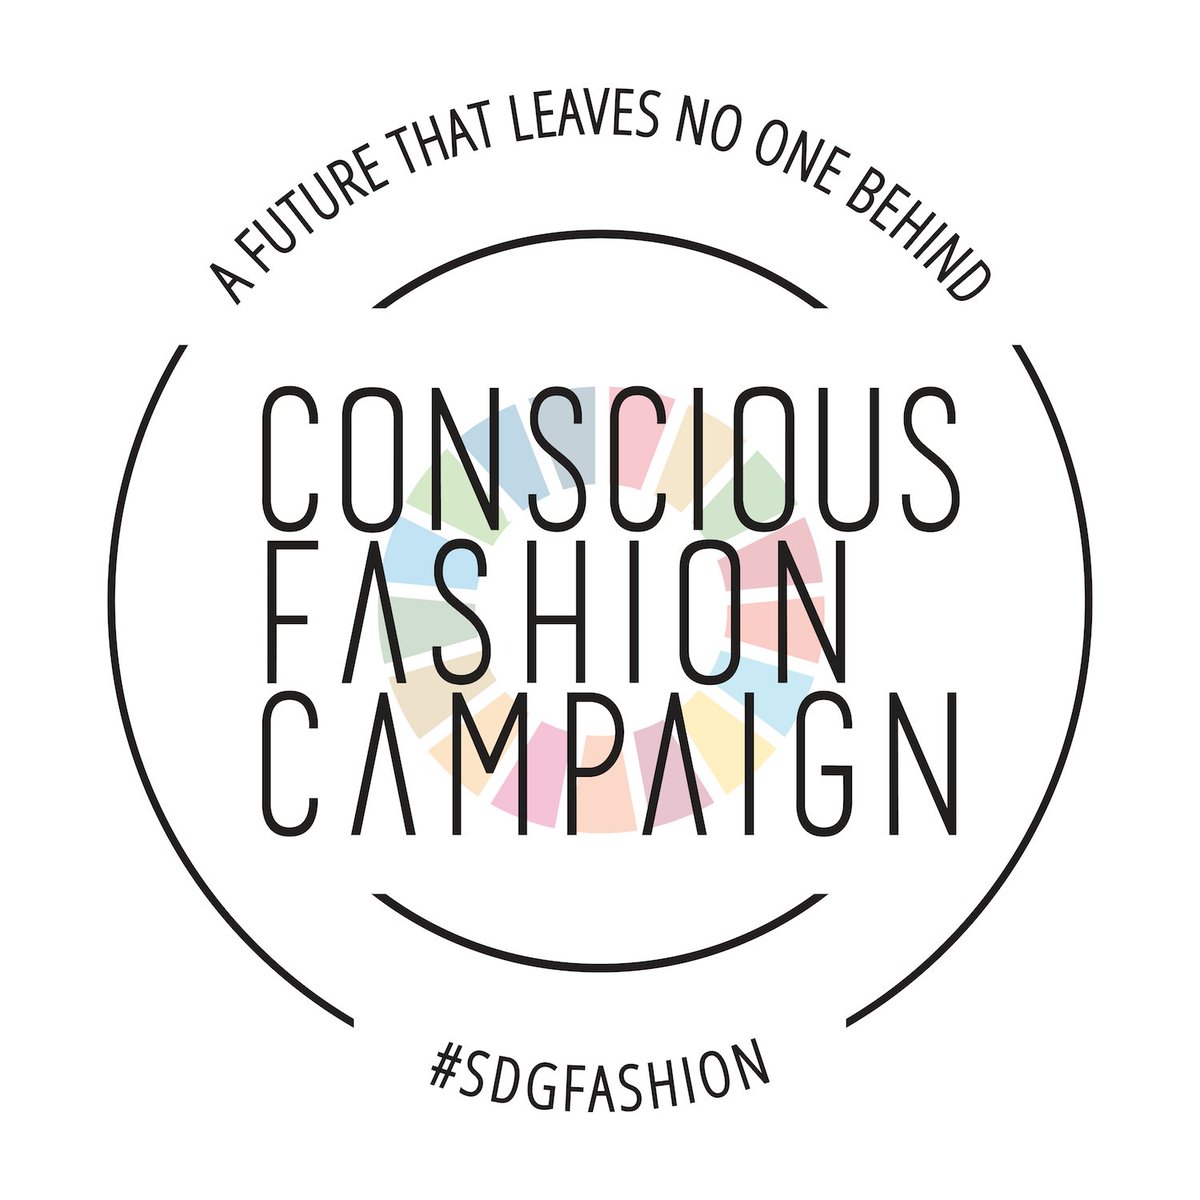 In 2019 we took the pledge. #GlobalFashionMarketplace is committed to the UN sustainable development goals and is partnering with the Conscious Fashion Campaign to spread the word. Join us to redefine fashion as we know it today. #sdgfashion